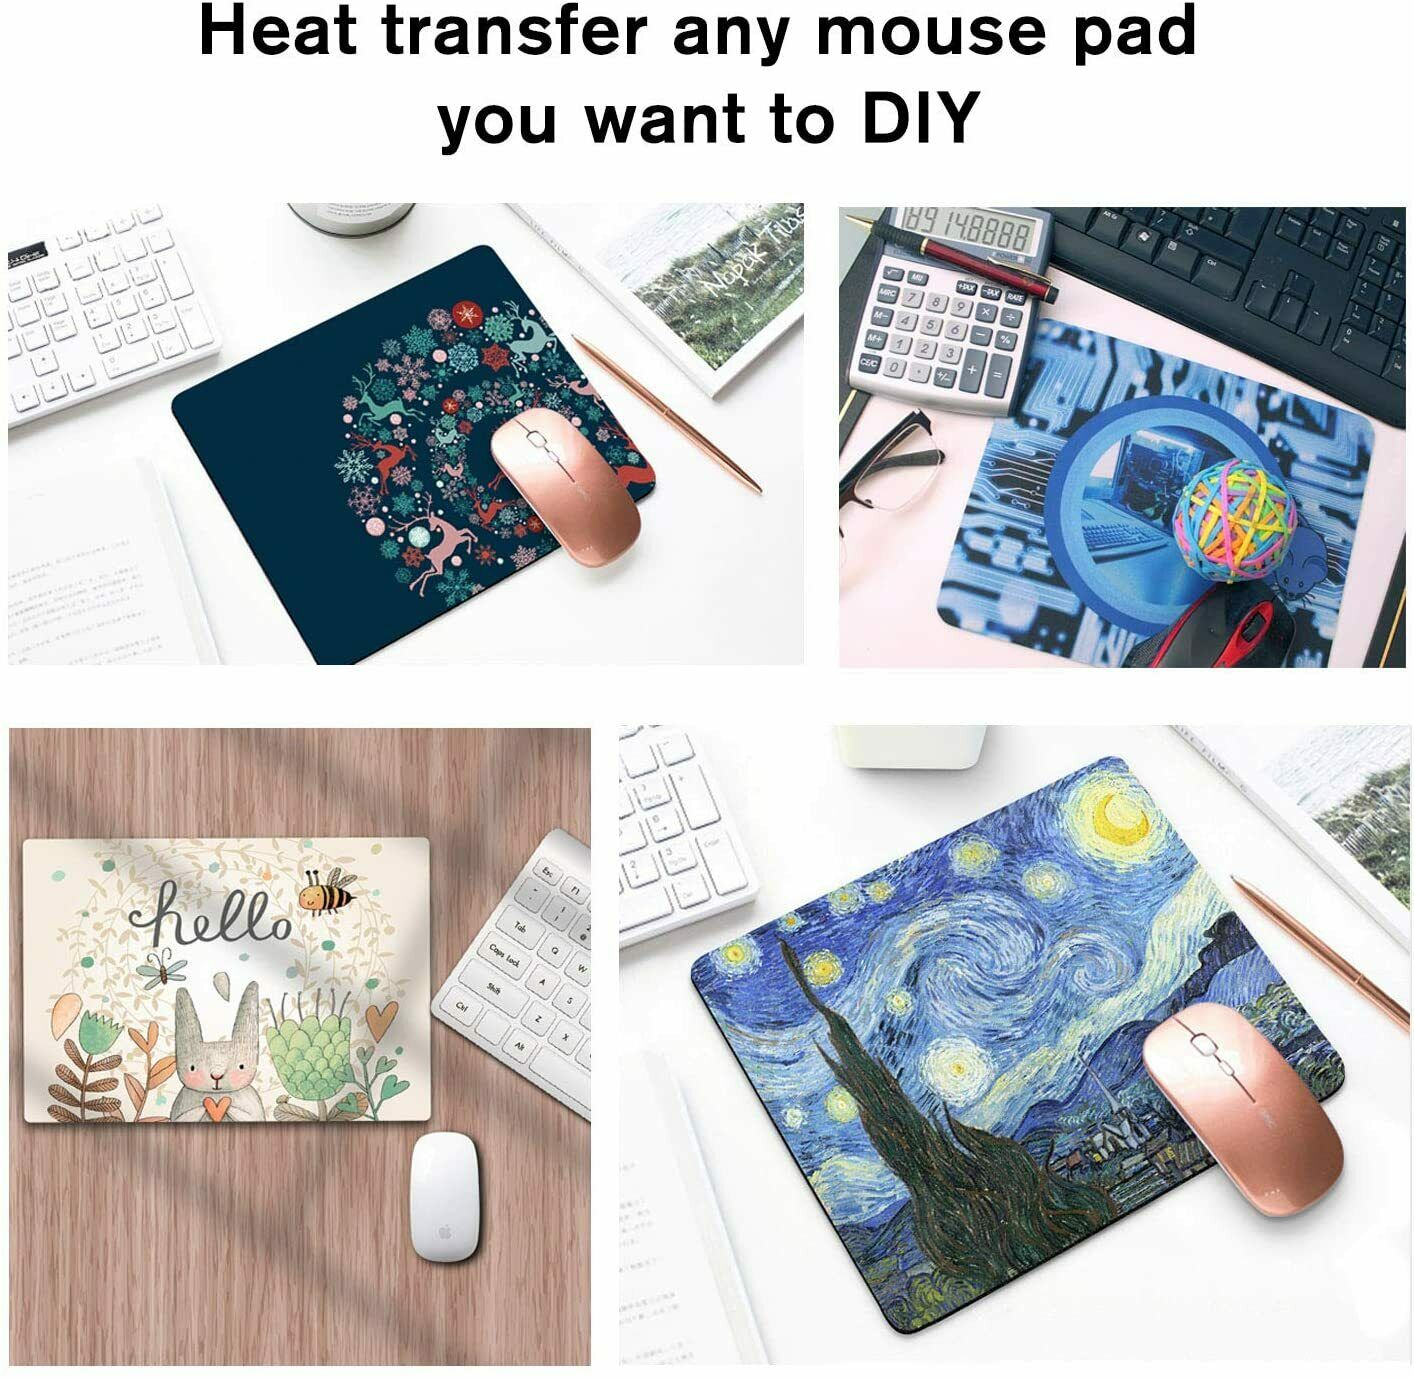 A-SUB Sublimation Blank Mouse Pads 9.4 inch x 7.9 inch 5 Packs 55 Pieces  for Sublimation Heat Press Transfer 0.12 inch Thickness 